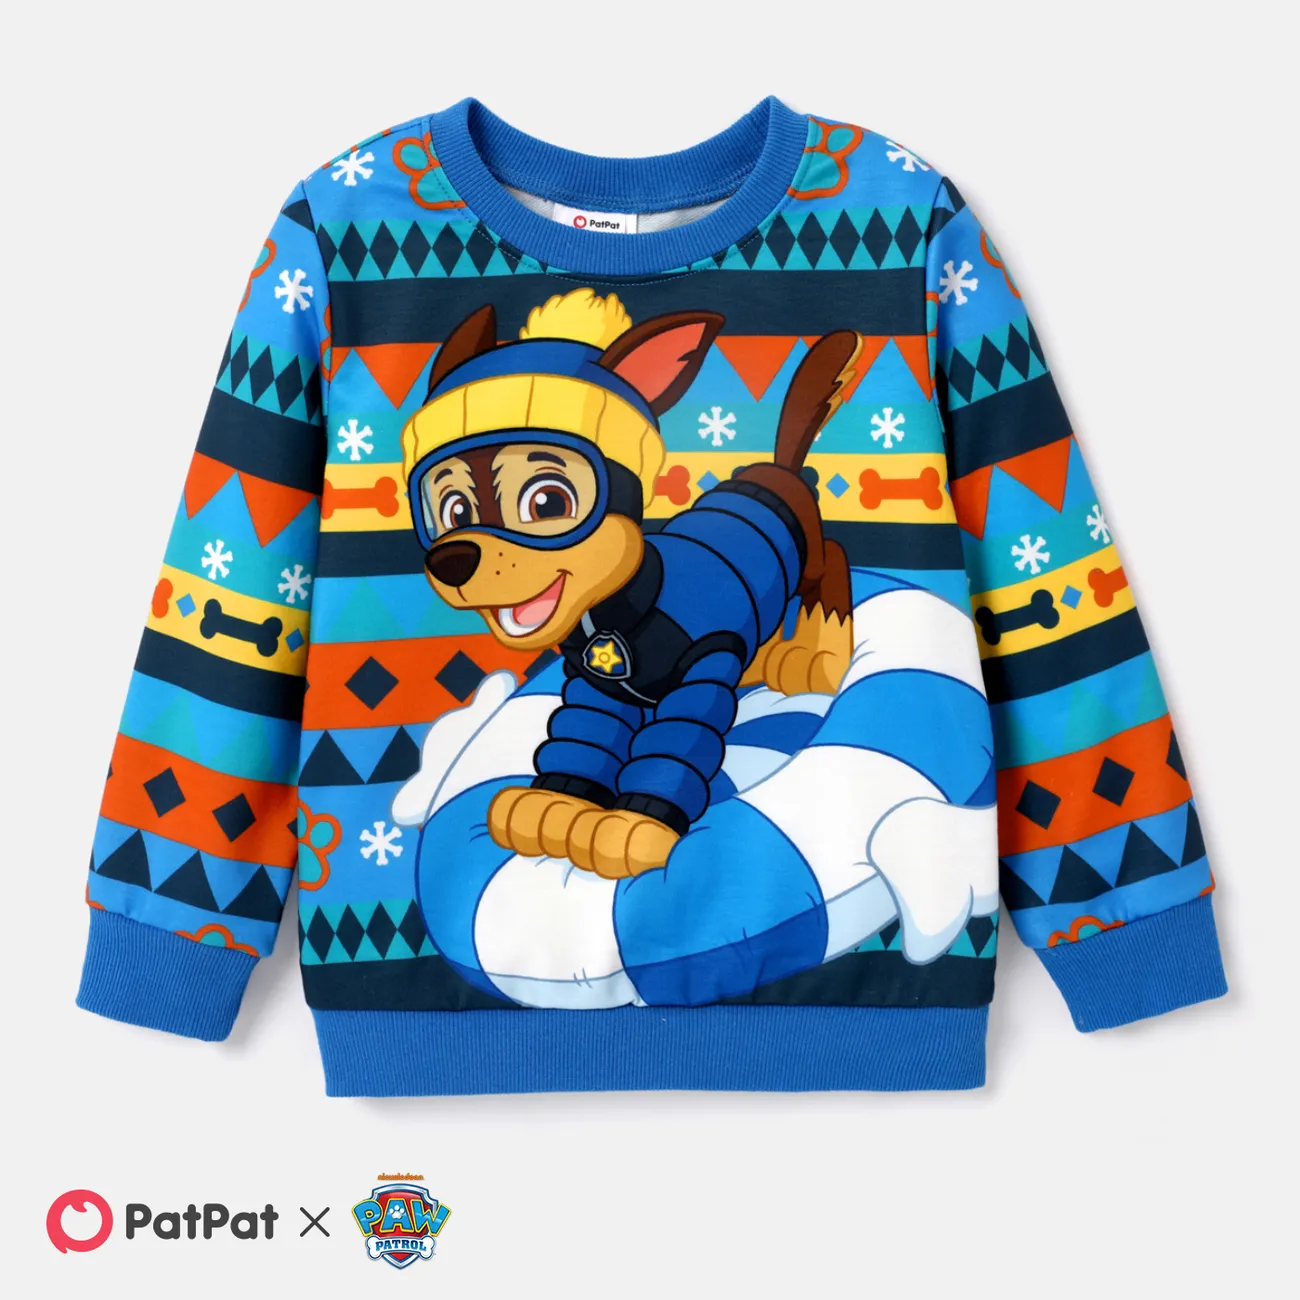 PAW Patrol Toddler Character Print Girl/Boy Pullover US Mobile $9.99 PatPat Long-sleeve Sweatshirt Only